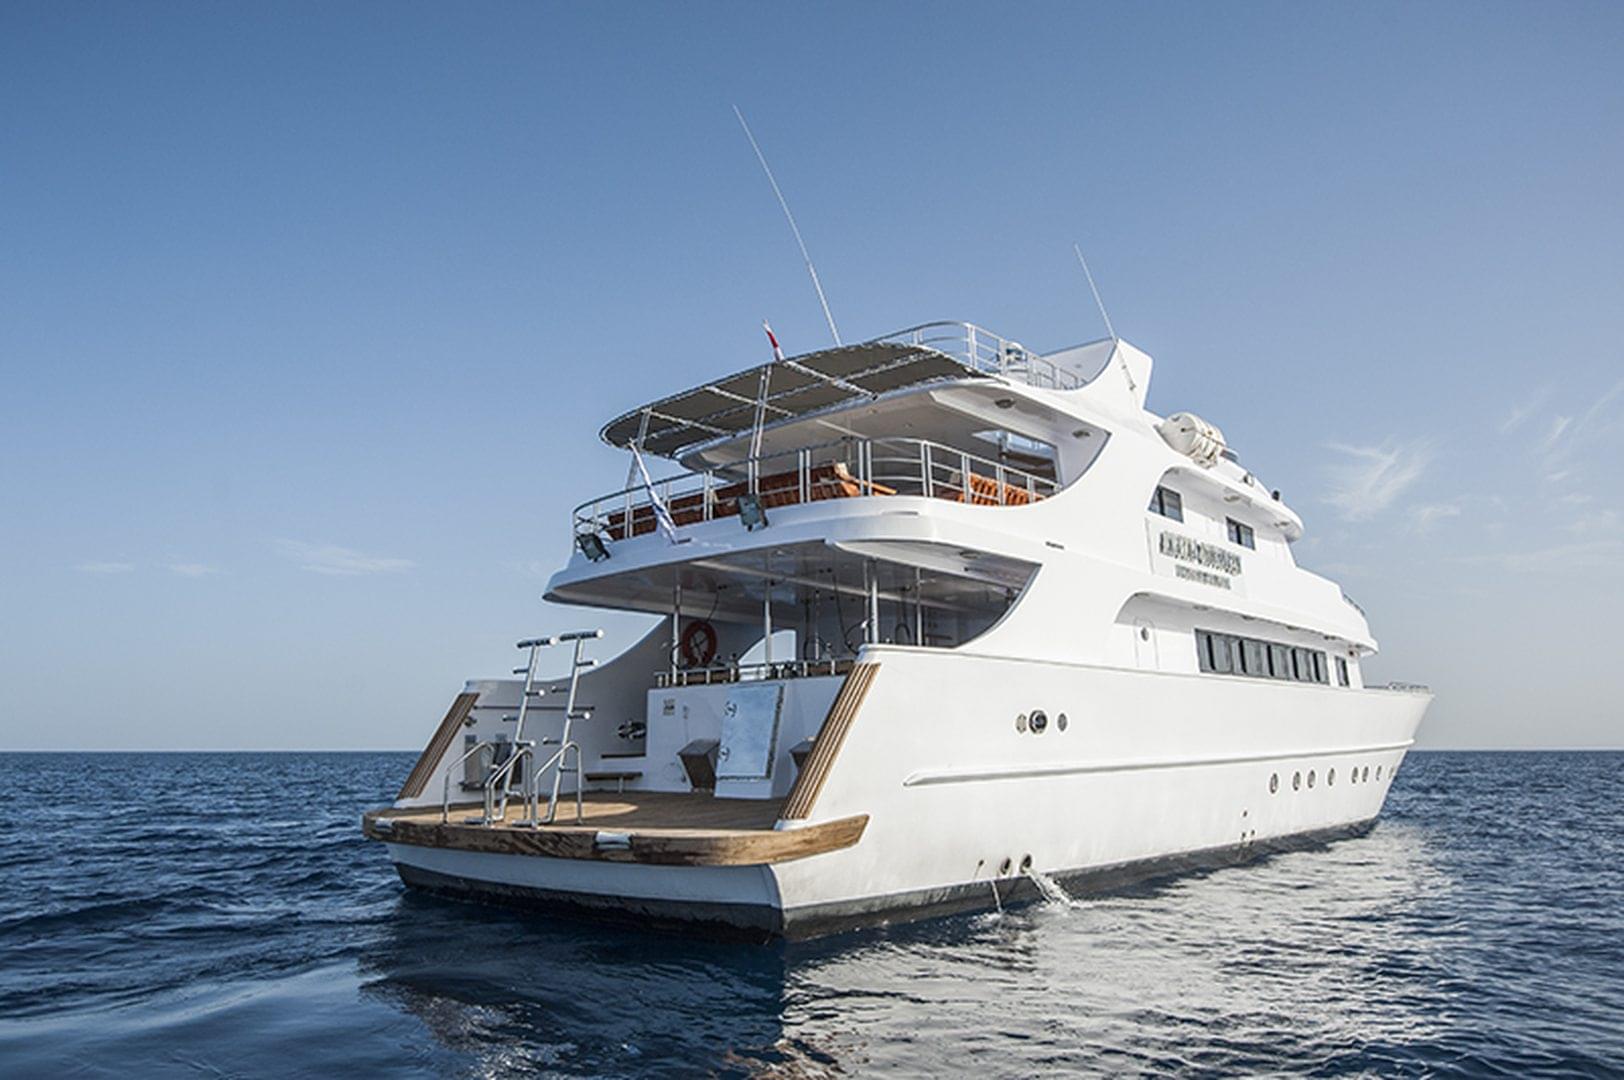 The MY Amelia, one of the best liveaboards in the Red Sea for exploring colorful coral reefs and meeting Red Sea fish